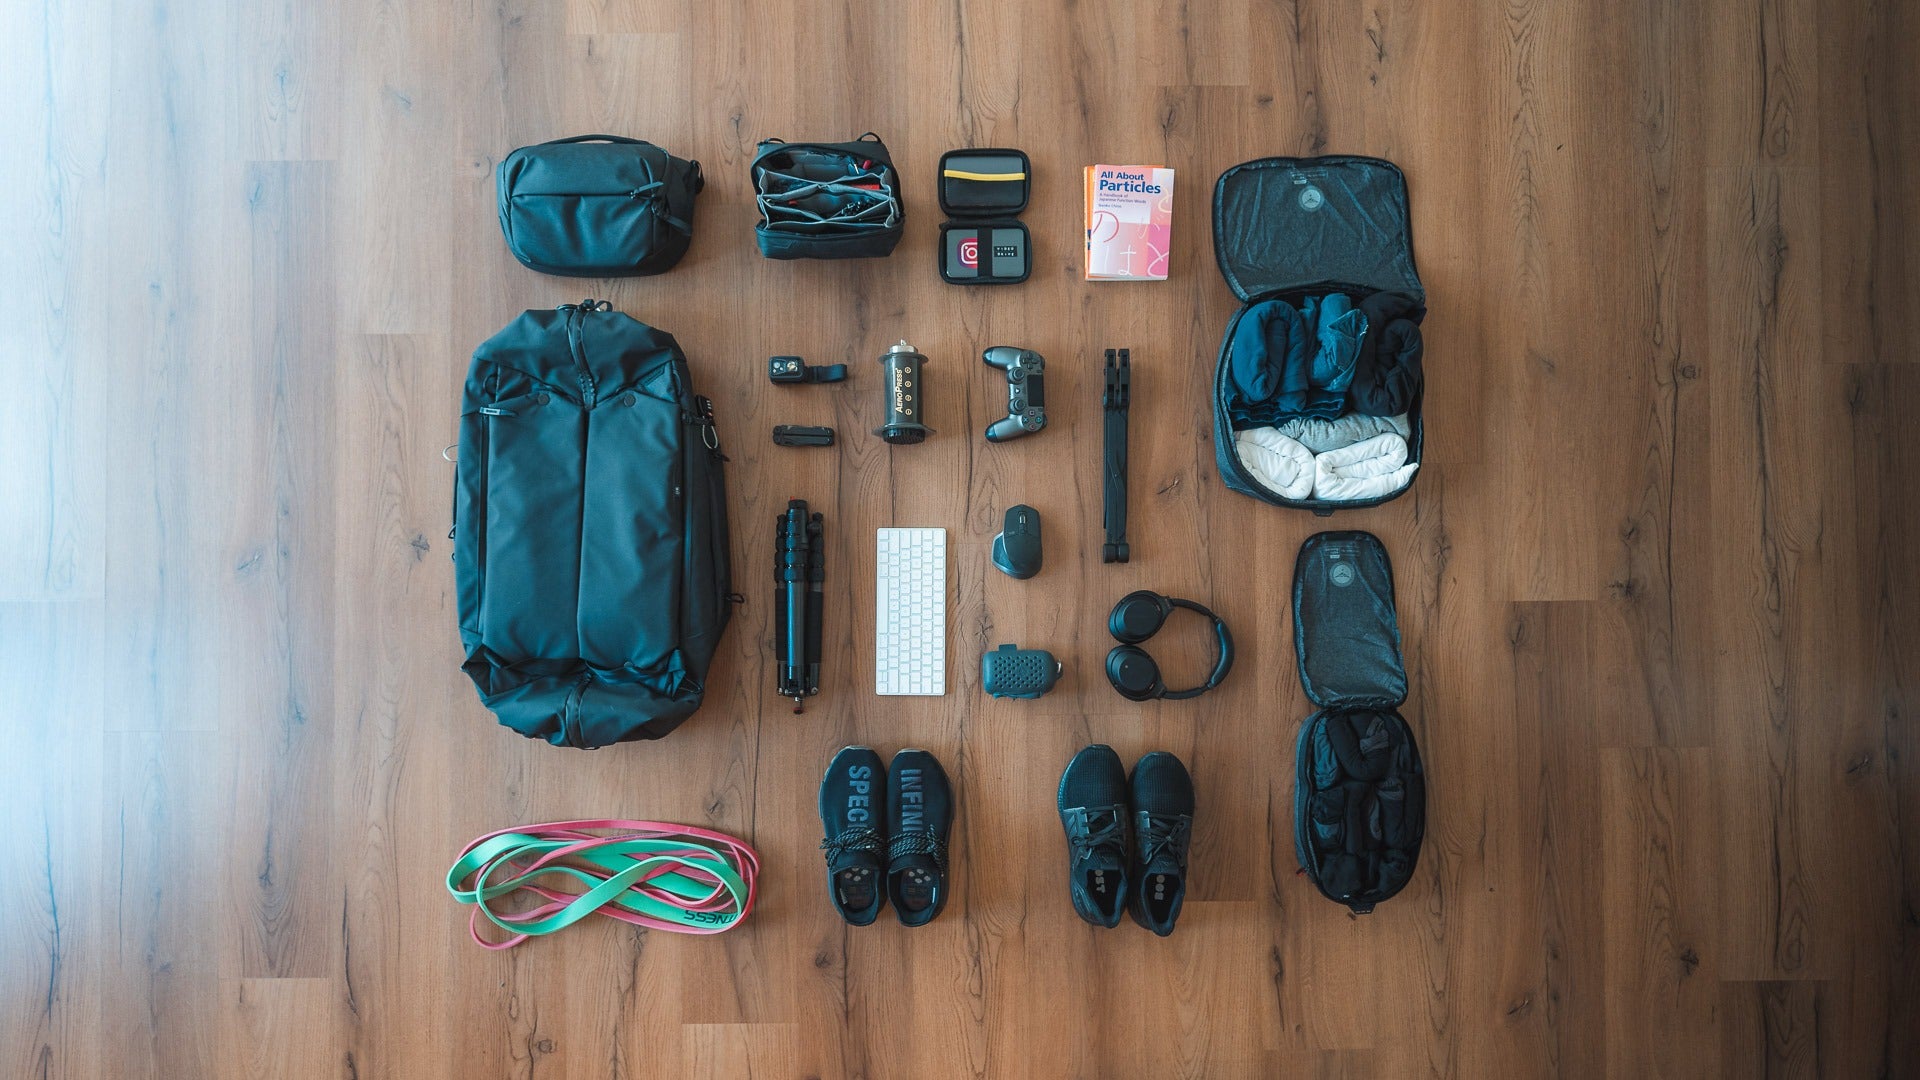 The gear I’m travelling the world with - Peak Design Travel Duffelpack 65L